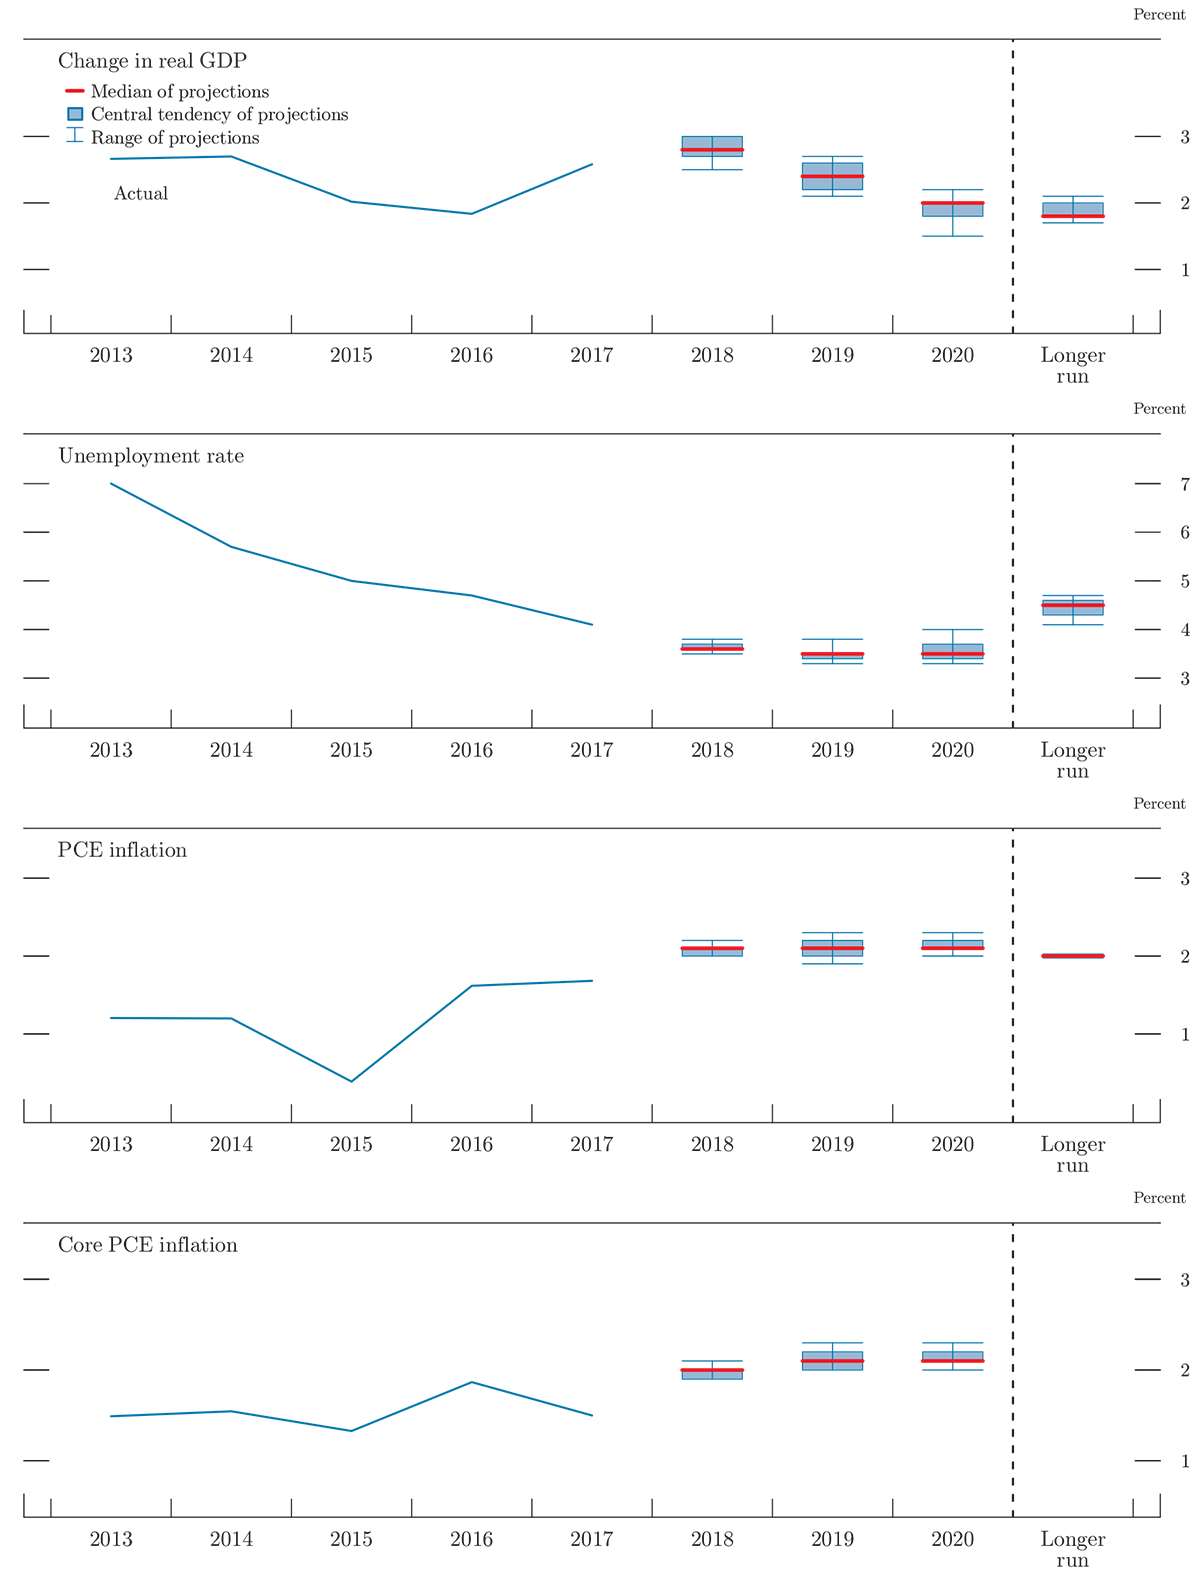 Figure 1. Medians, central tendencies, and ranges of economic projections, 2018-20 and over the longer run.